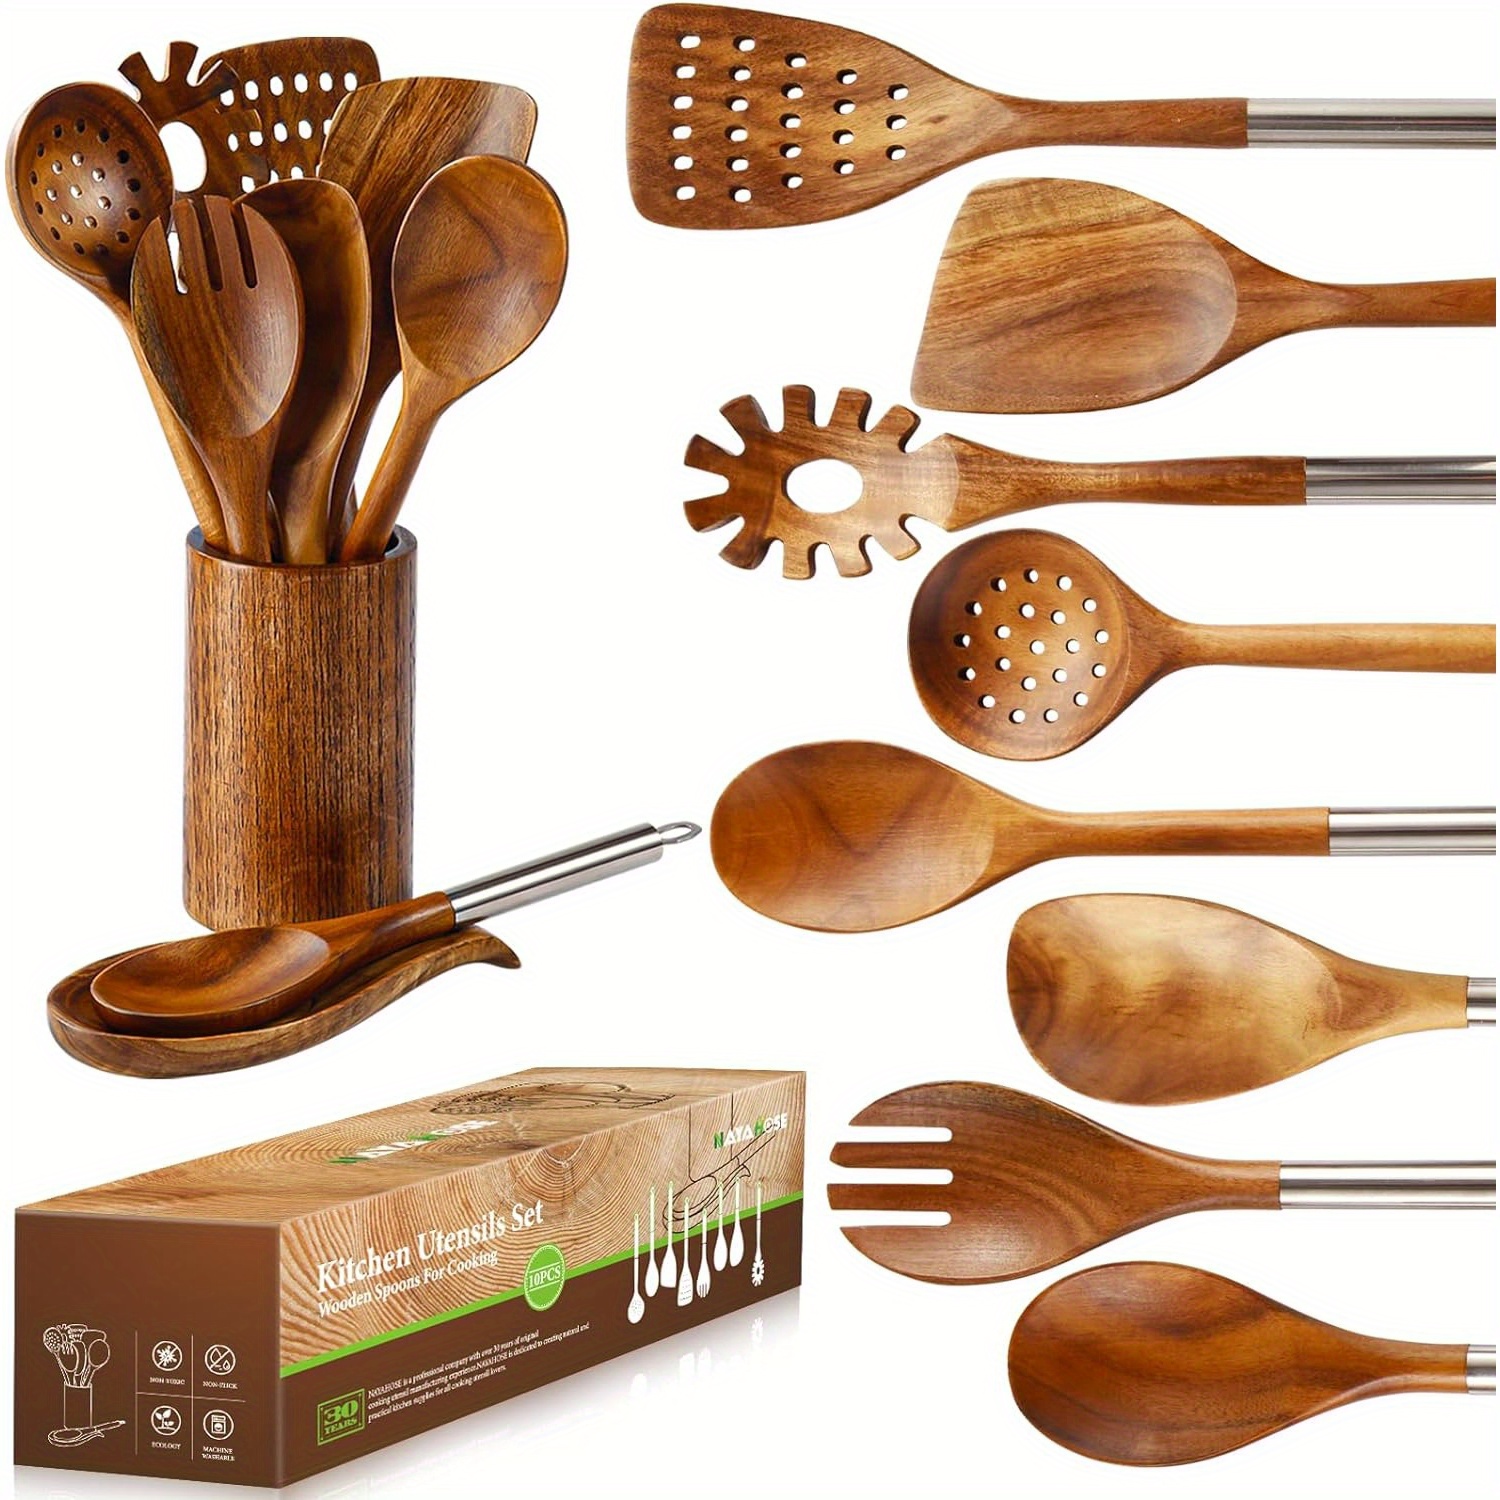 

10 Pcs Wooden Spoons For Cooking, Spoons And Spatula Set With Stainless Steel Handle, Teak Wooden Utensils Set With Holder & Spoon Rest, Kitchen Utensils For Non-stick Cookware